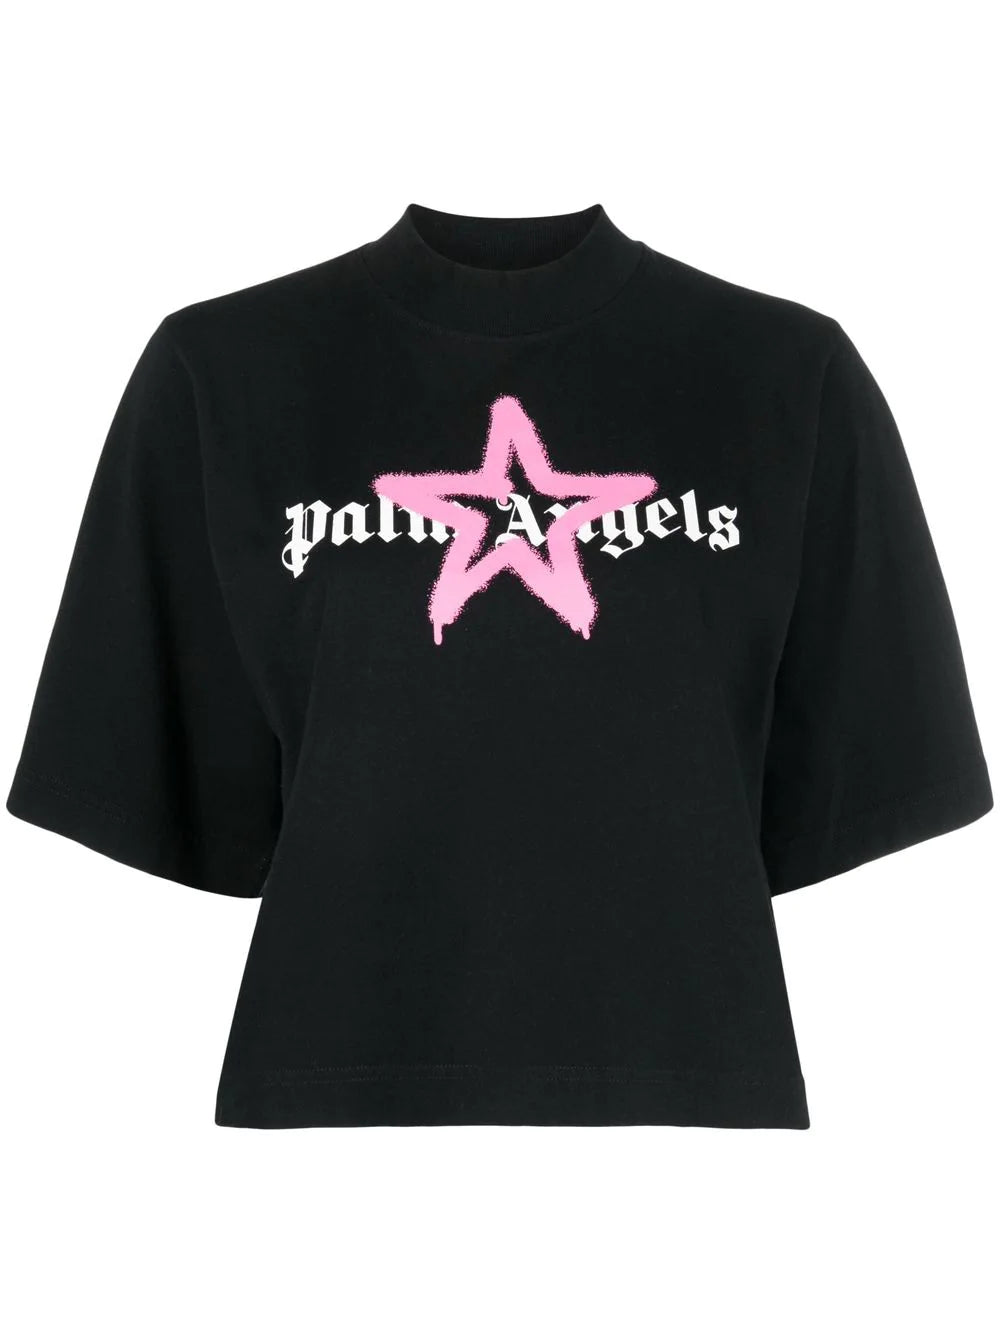 Palm Angels Cropped top in black/ pink